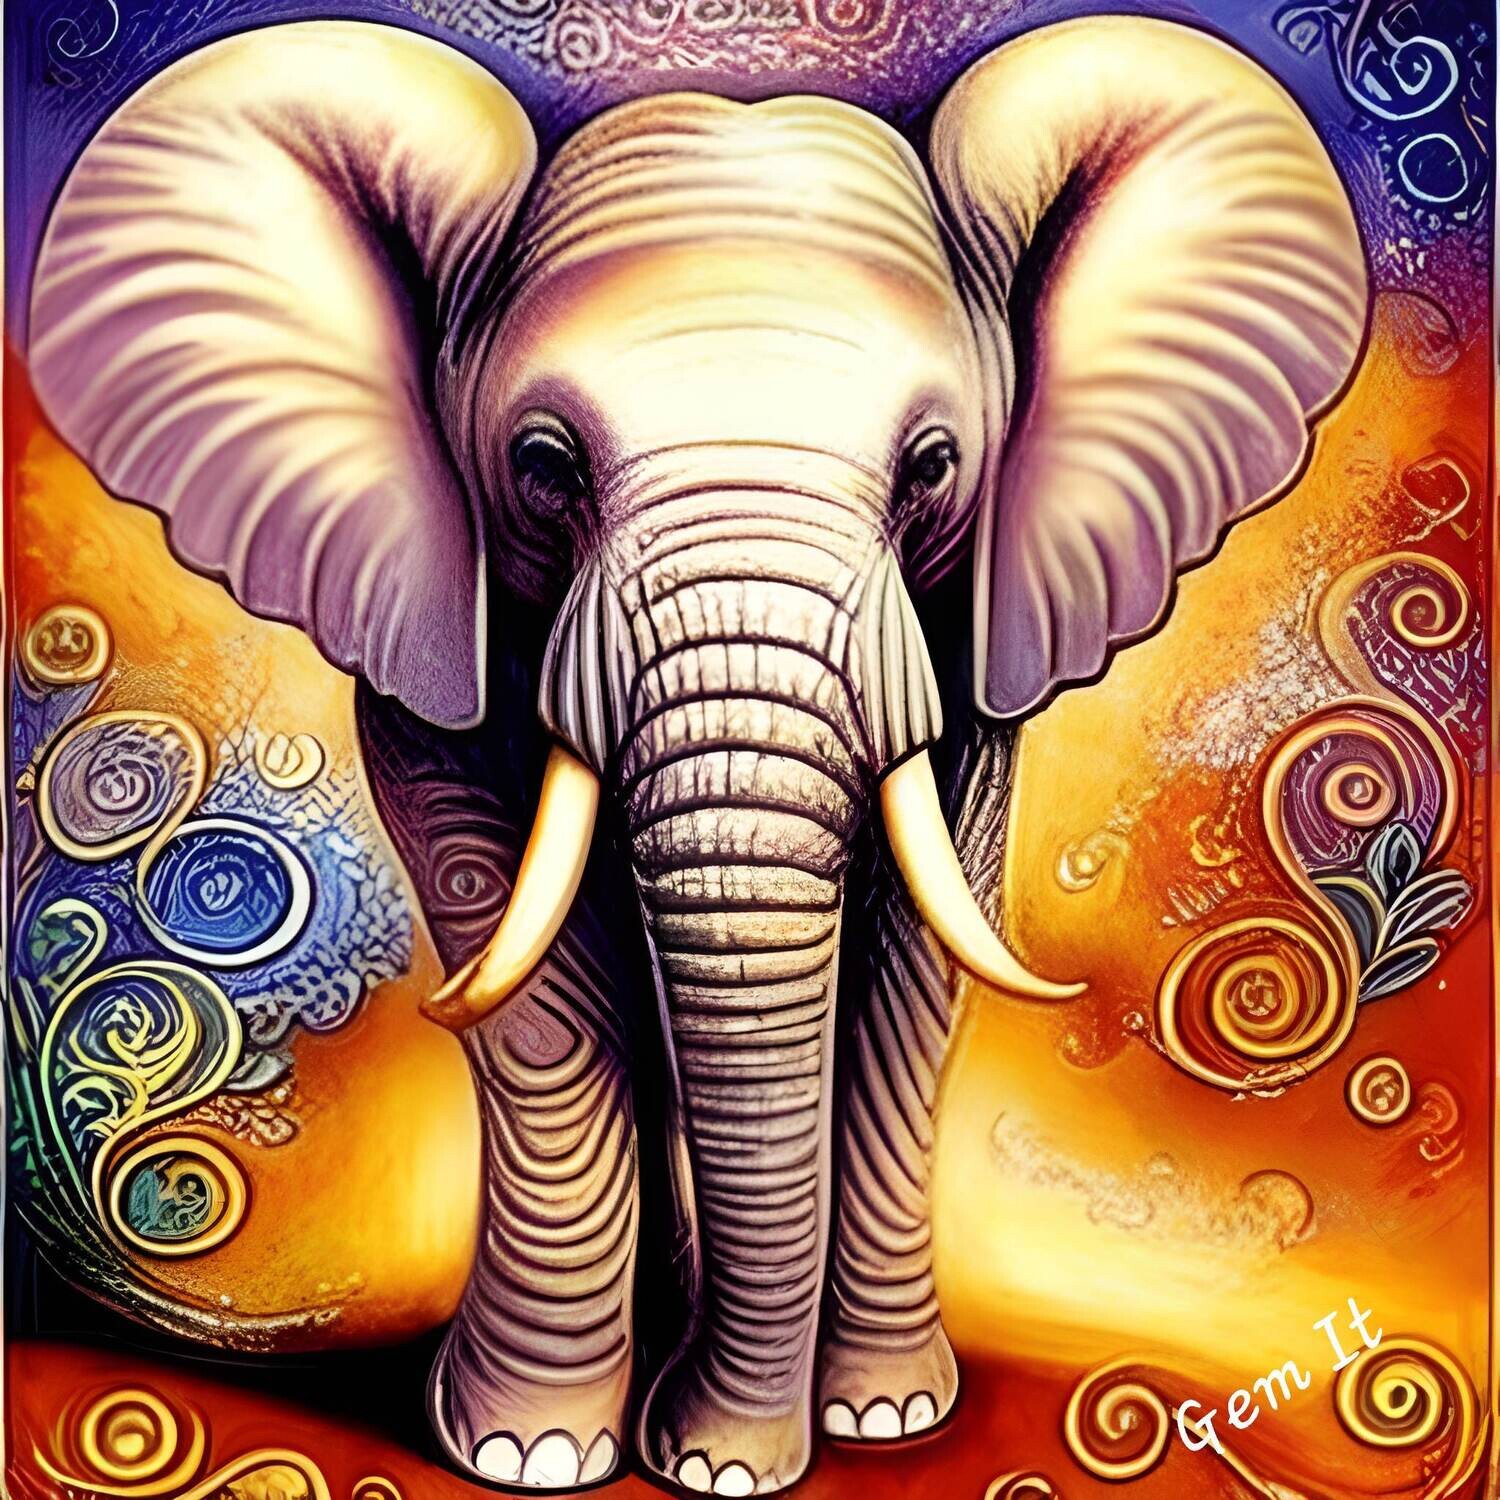 Elephant 177 - Full Drill Diamond Painting - Specially ordered for you. Delivery is approximately 4 - 6 weeks.